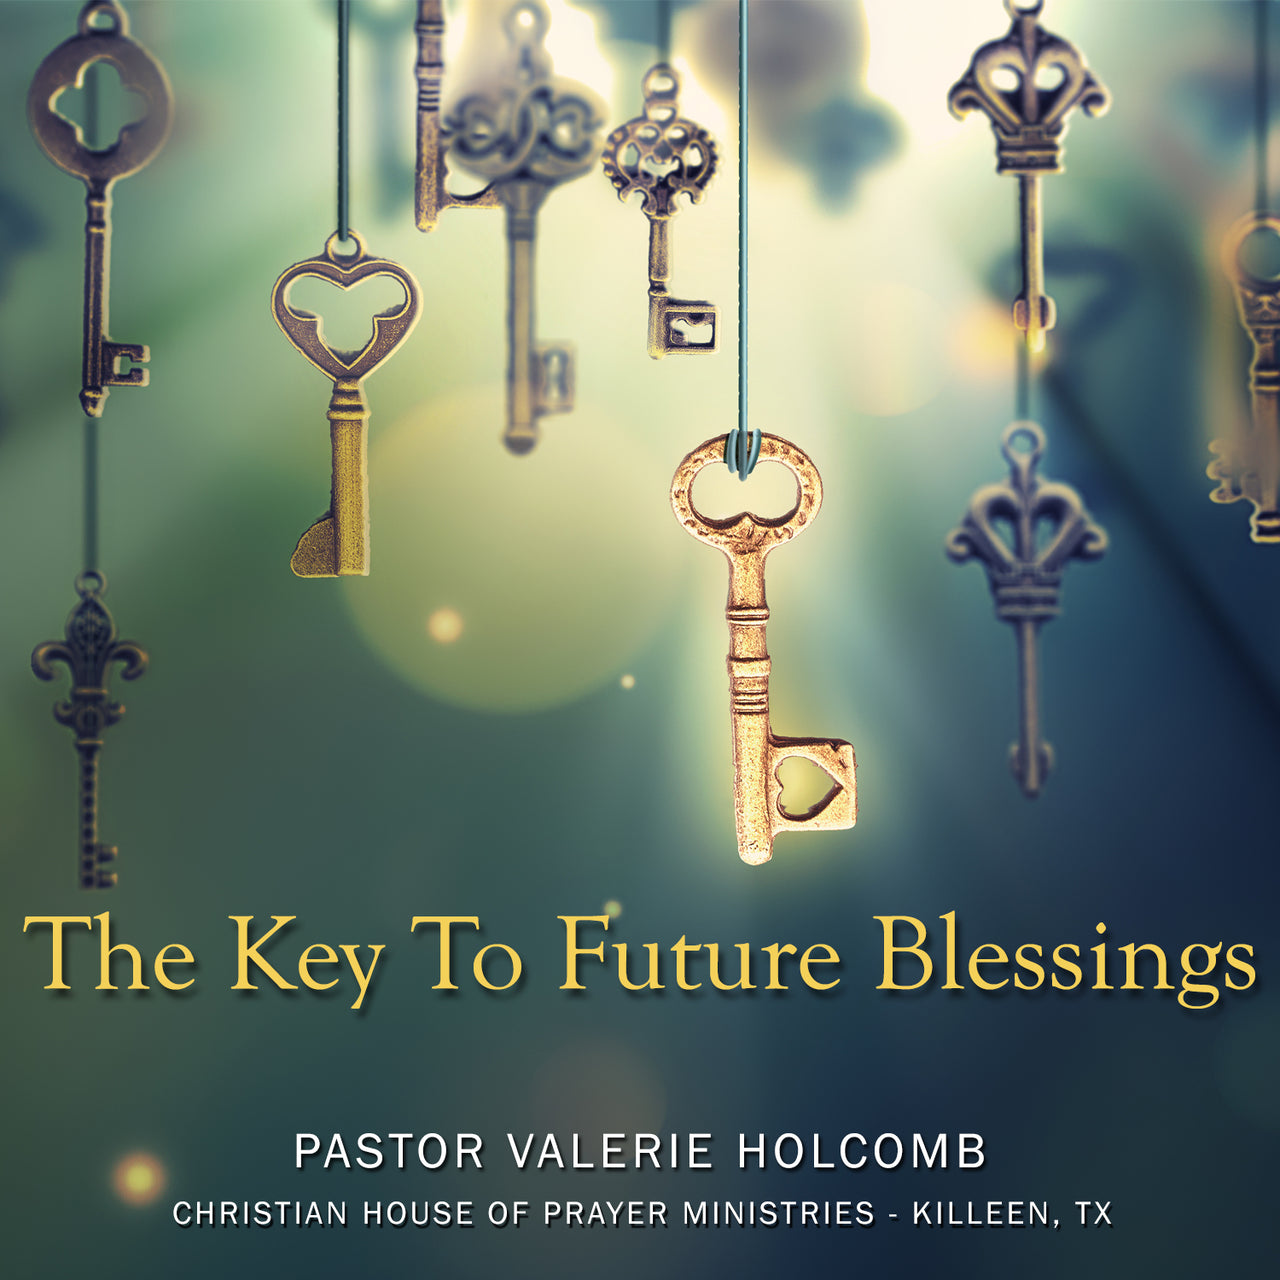 The Key to Future Blessings